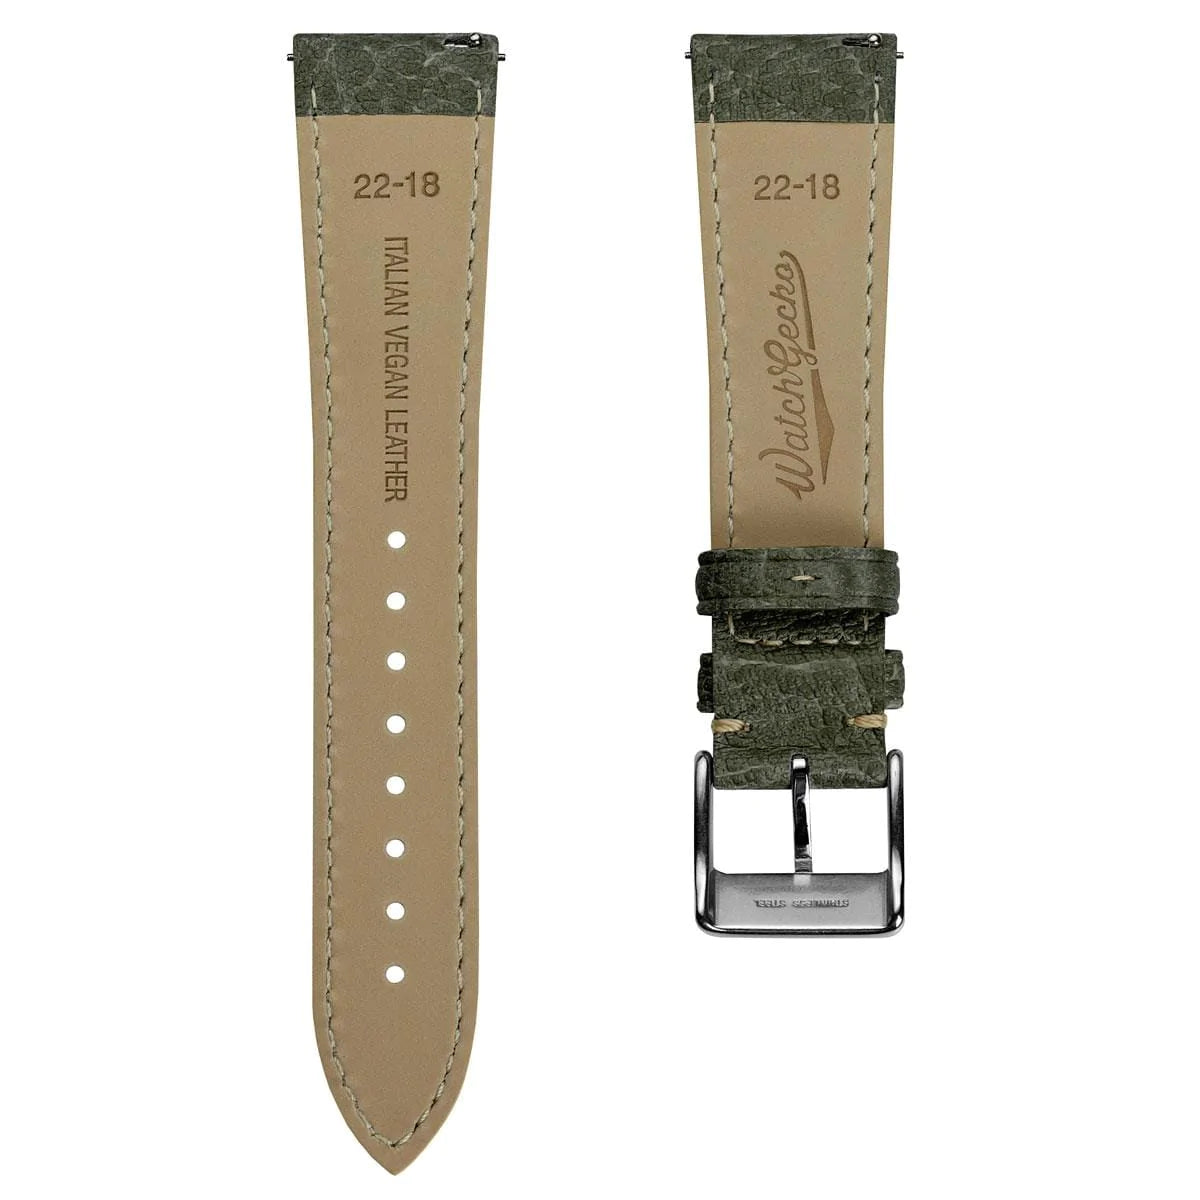 Vintage Highley Italian Vegan leather Watch Strap - Textured Olive Green